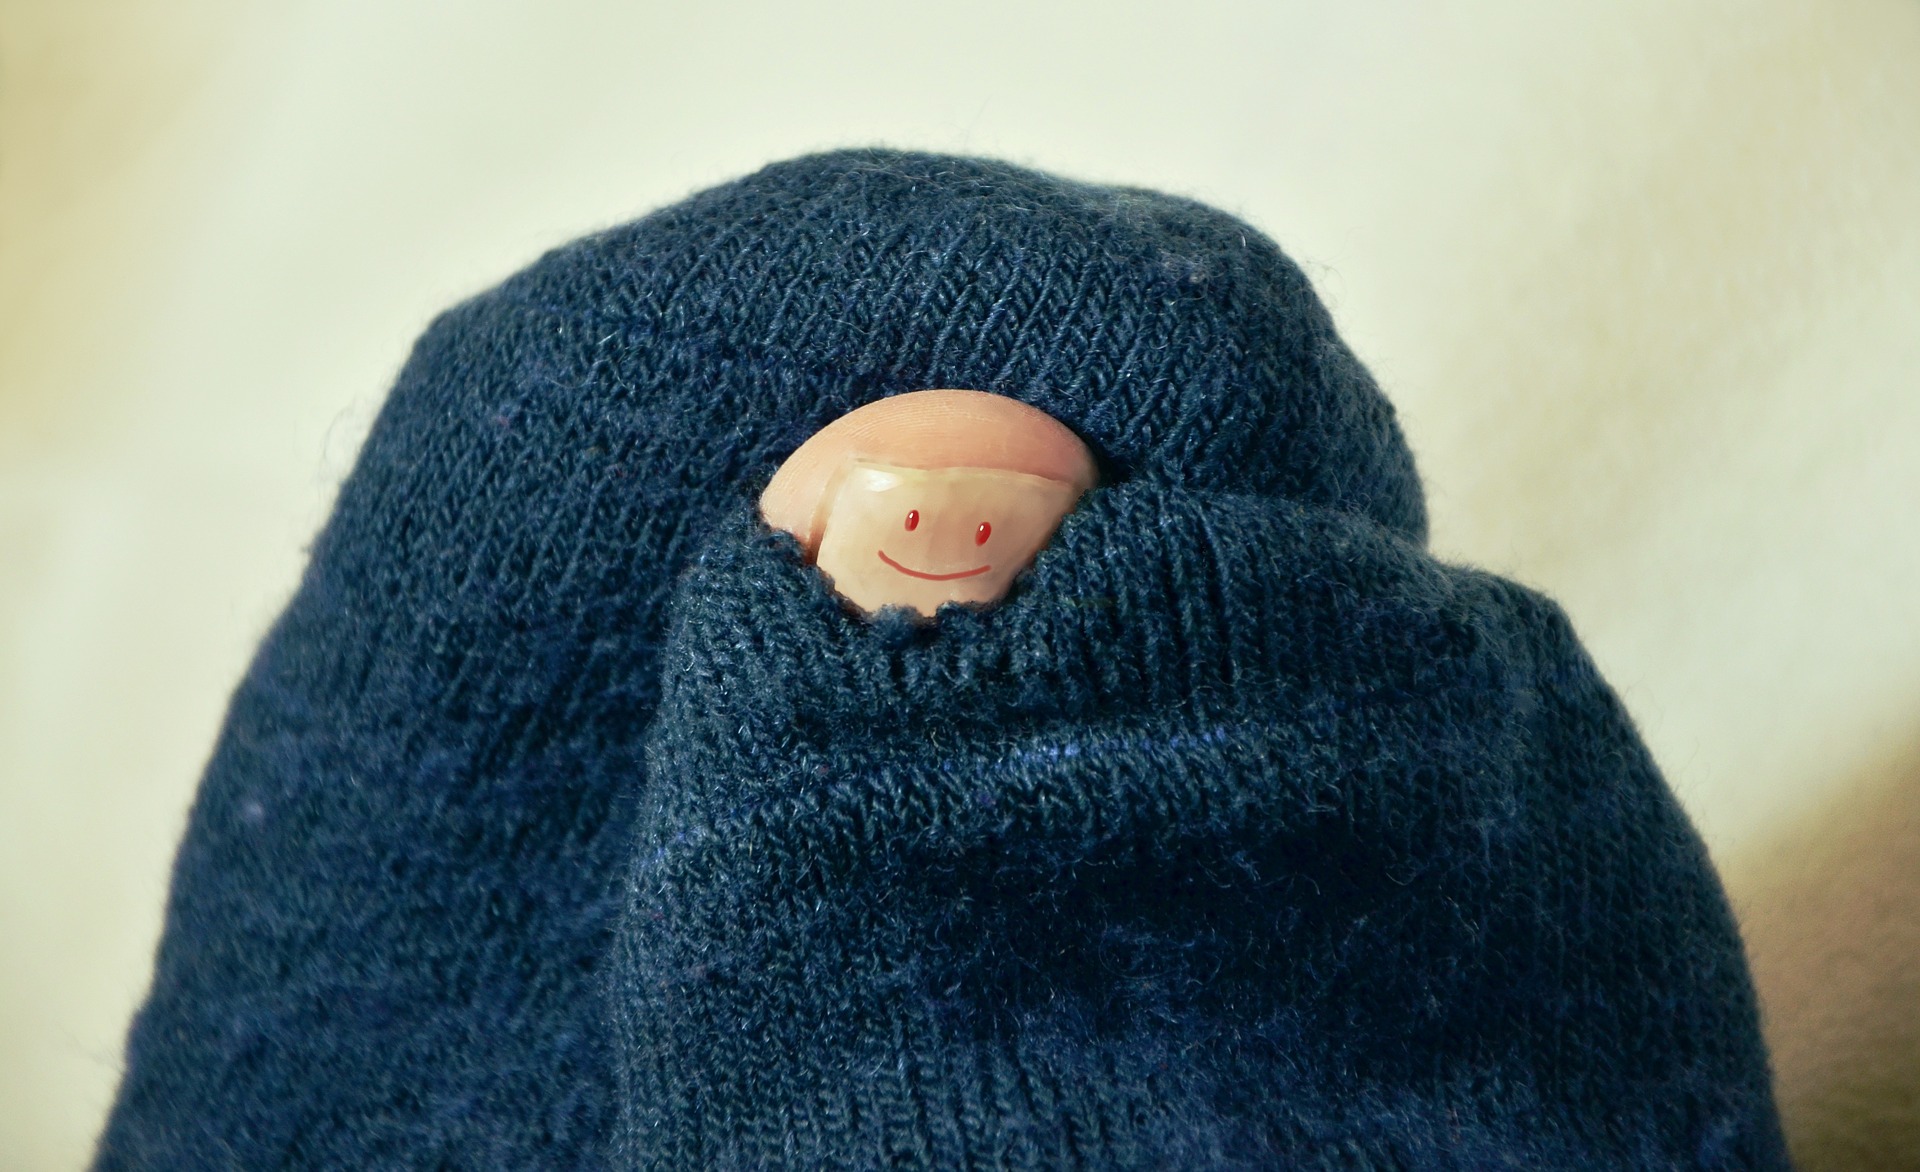 Toe poking through sock with smiley on big toe